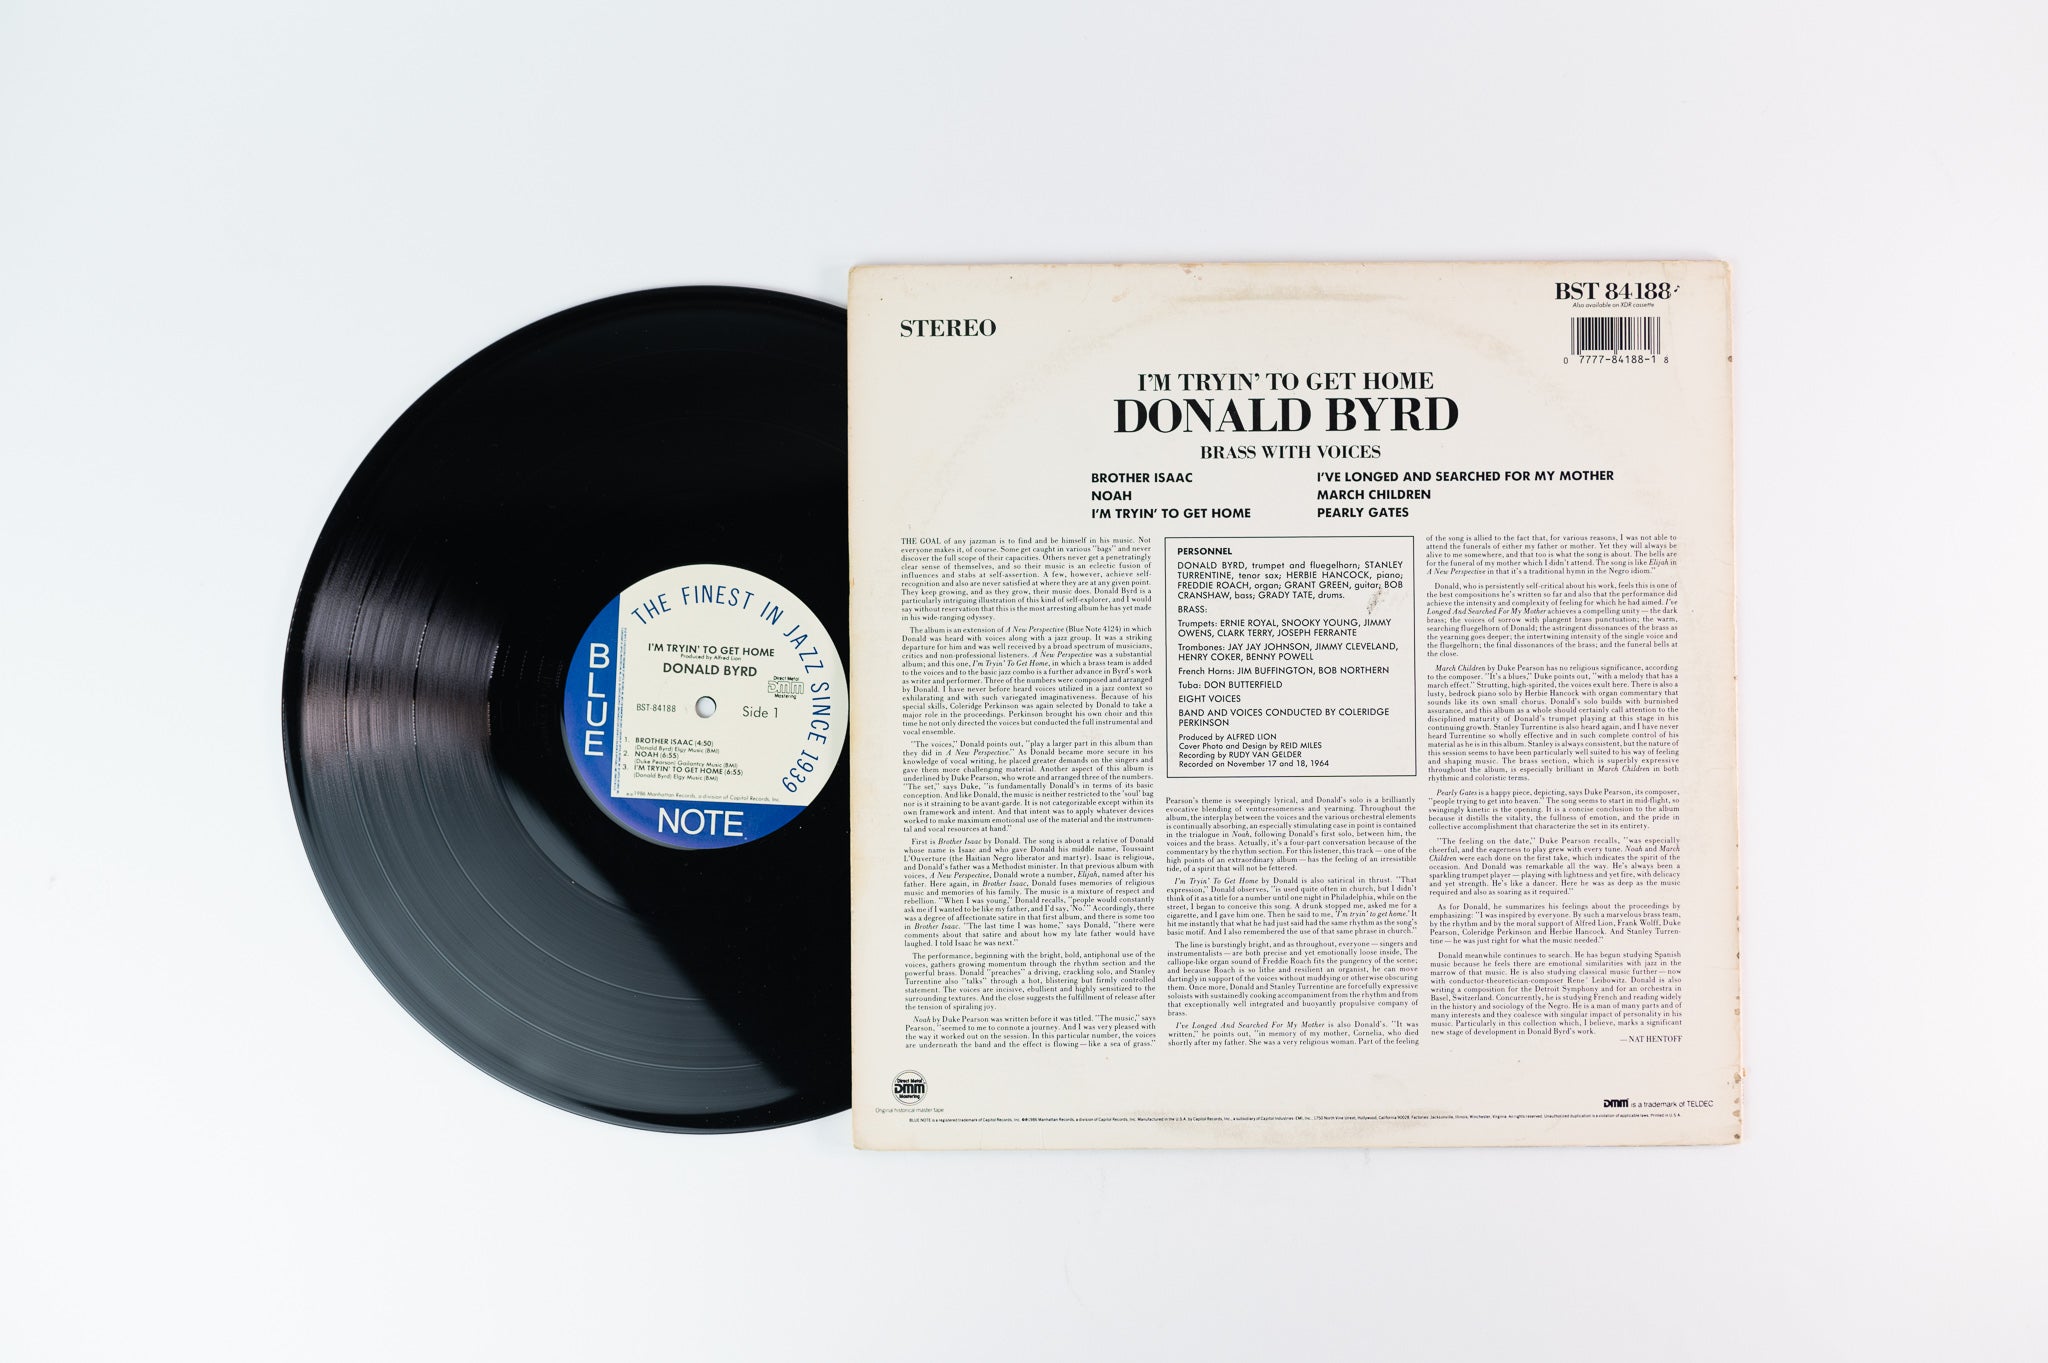 Donald Byrd - I'm Tryin' To Get Home (Brass With Voices) on Blue Note BST 84199 DMM Reissue